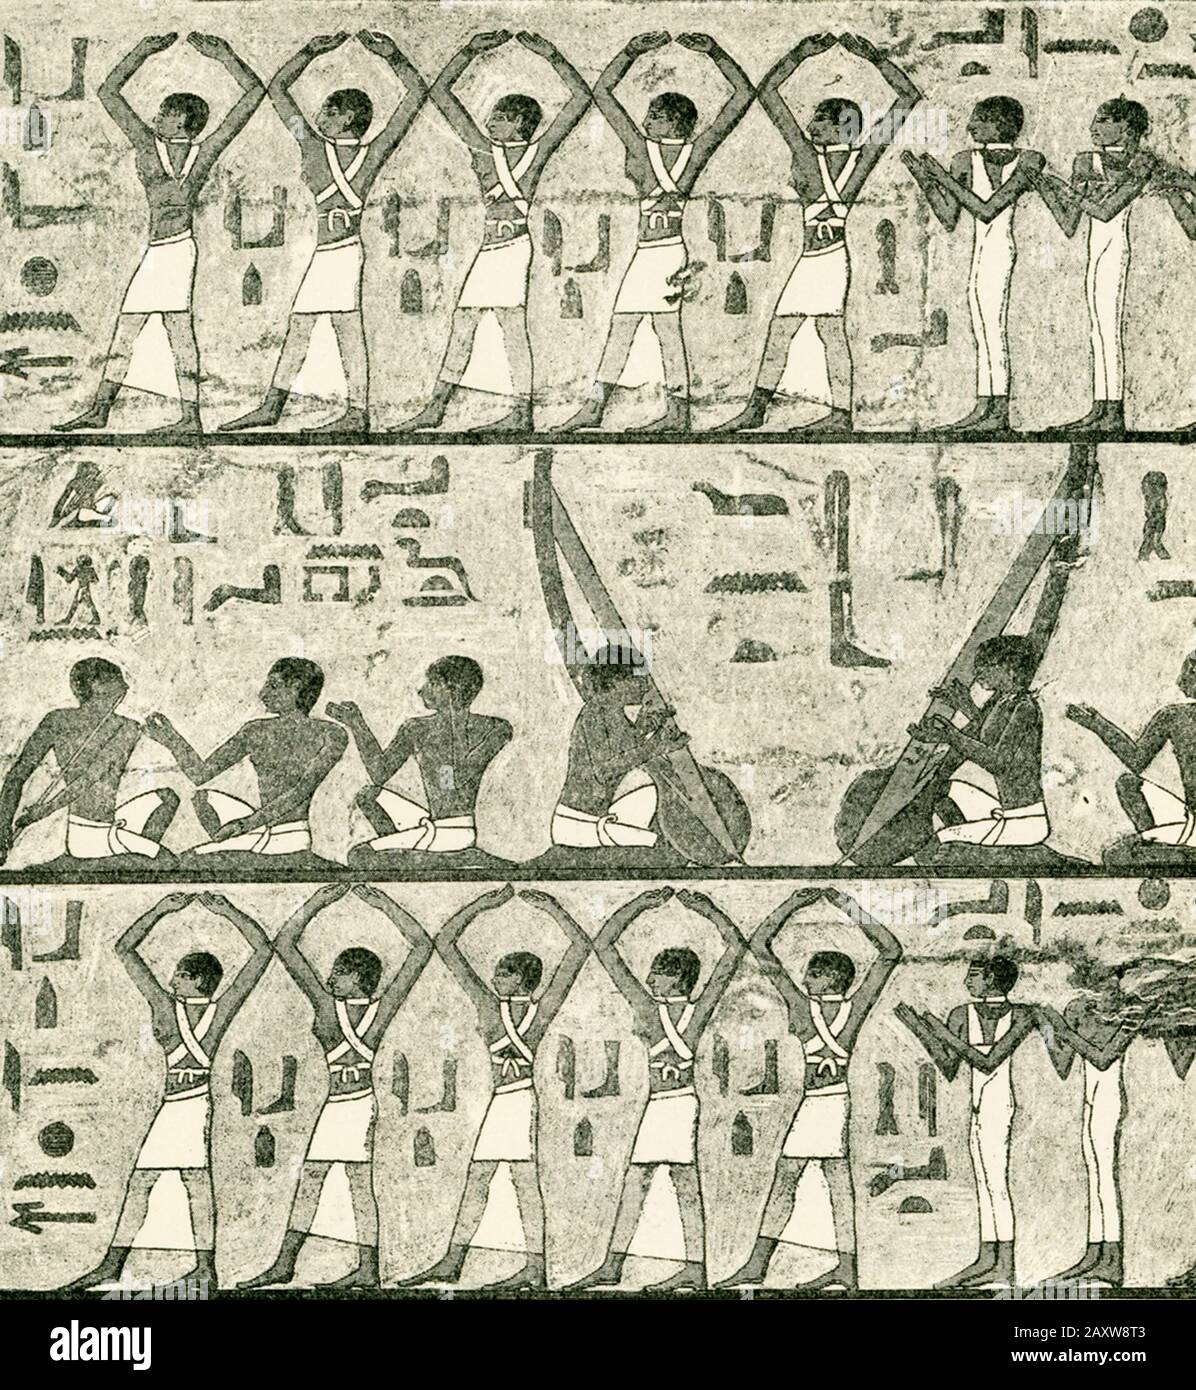 Men and women singers, flute-players, harpists, and dancers from the tomb of Ti (also spelled TY). The Mastaba of Ti was discovered by Auguste Mariette in 1865. This grand and detailed private tomb is not only Old Kingdom art at its best but also one of the main sources of knowledge about life in Old Kingdom Egypt. Its owner, Ti, was overseer of the Abu Sir (also spelled Abusir) pyramids and sun temples (among other things) during the 5th dynasty ( c 2465-2323 BC). Ti was a hairdresser to the royalty during the early V Dynasty, as well as controller of the farms and stock that belonged to the Stock Photo